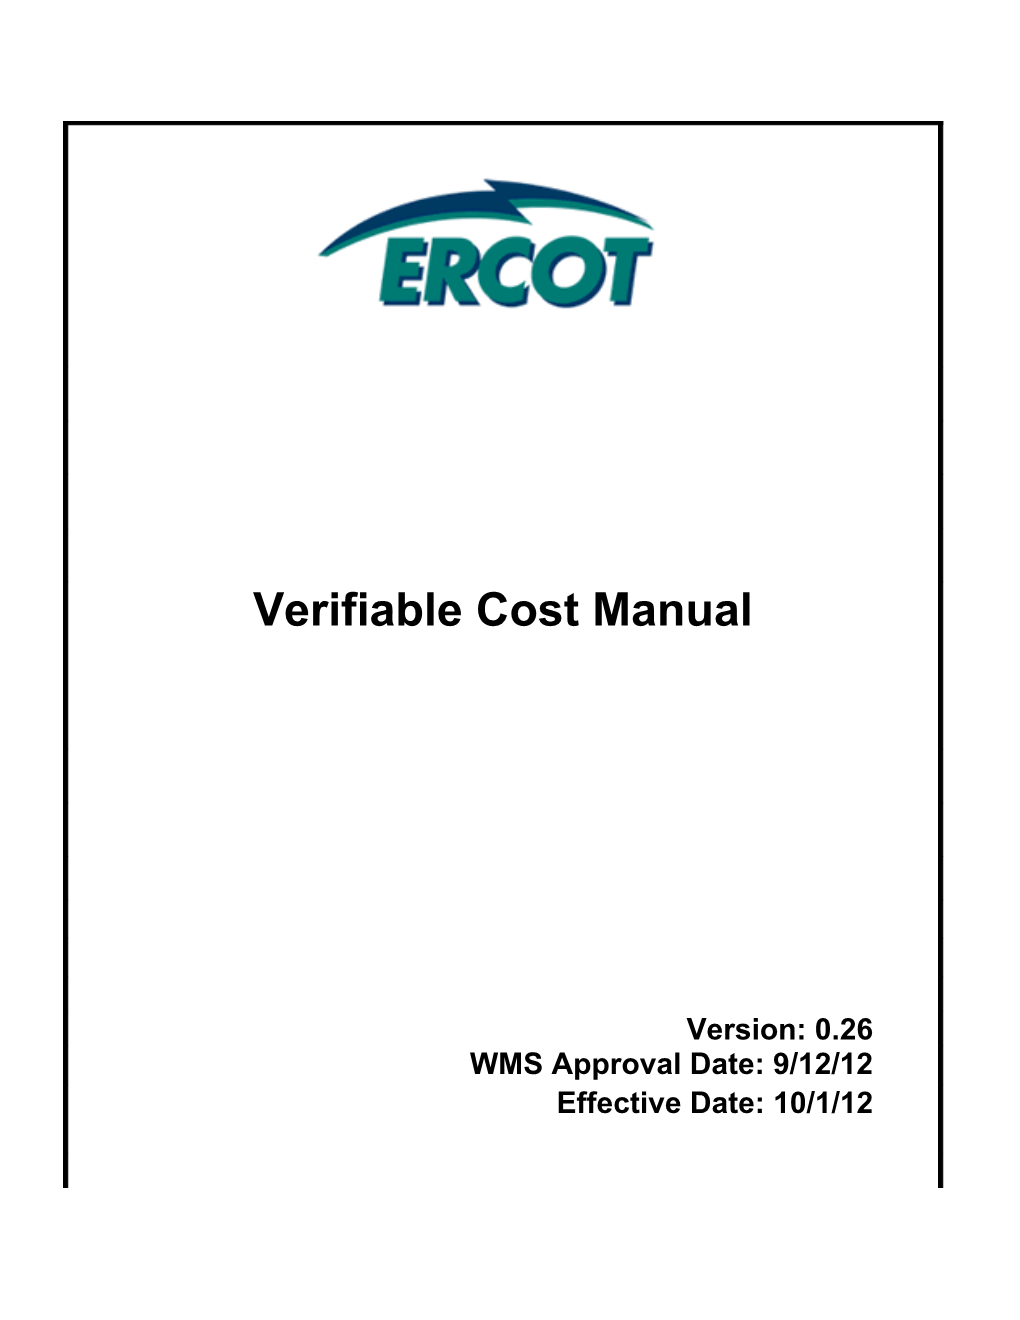 ERCOT's Verifiable Cost Manual